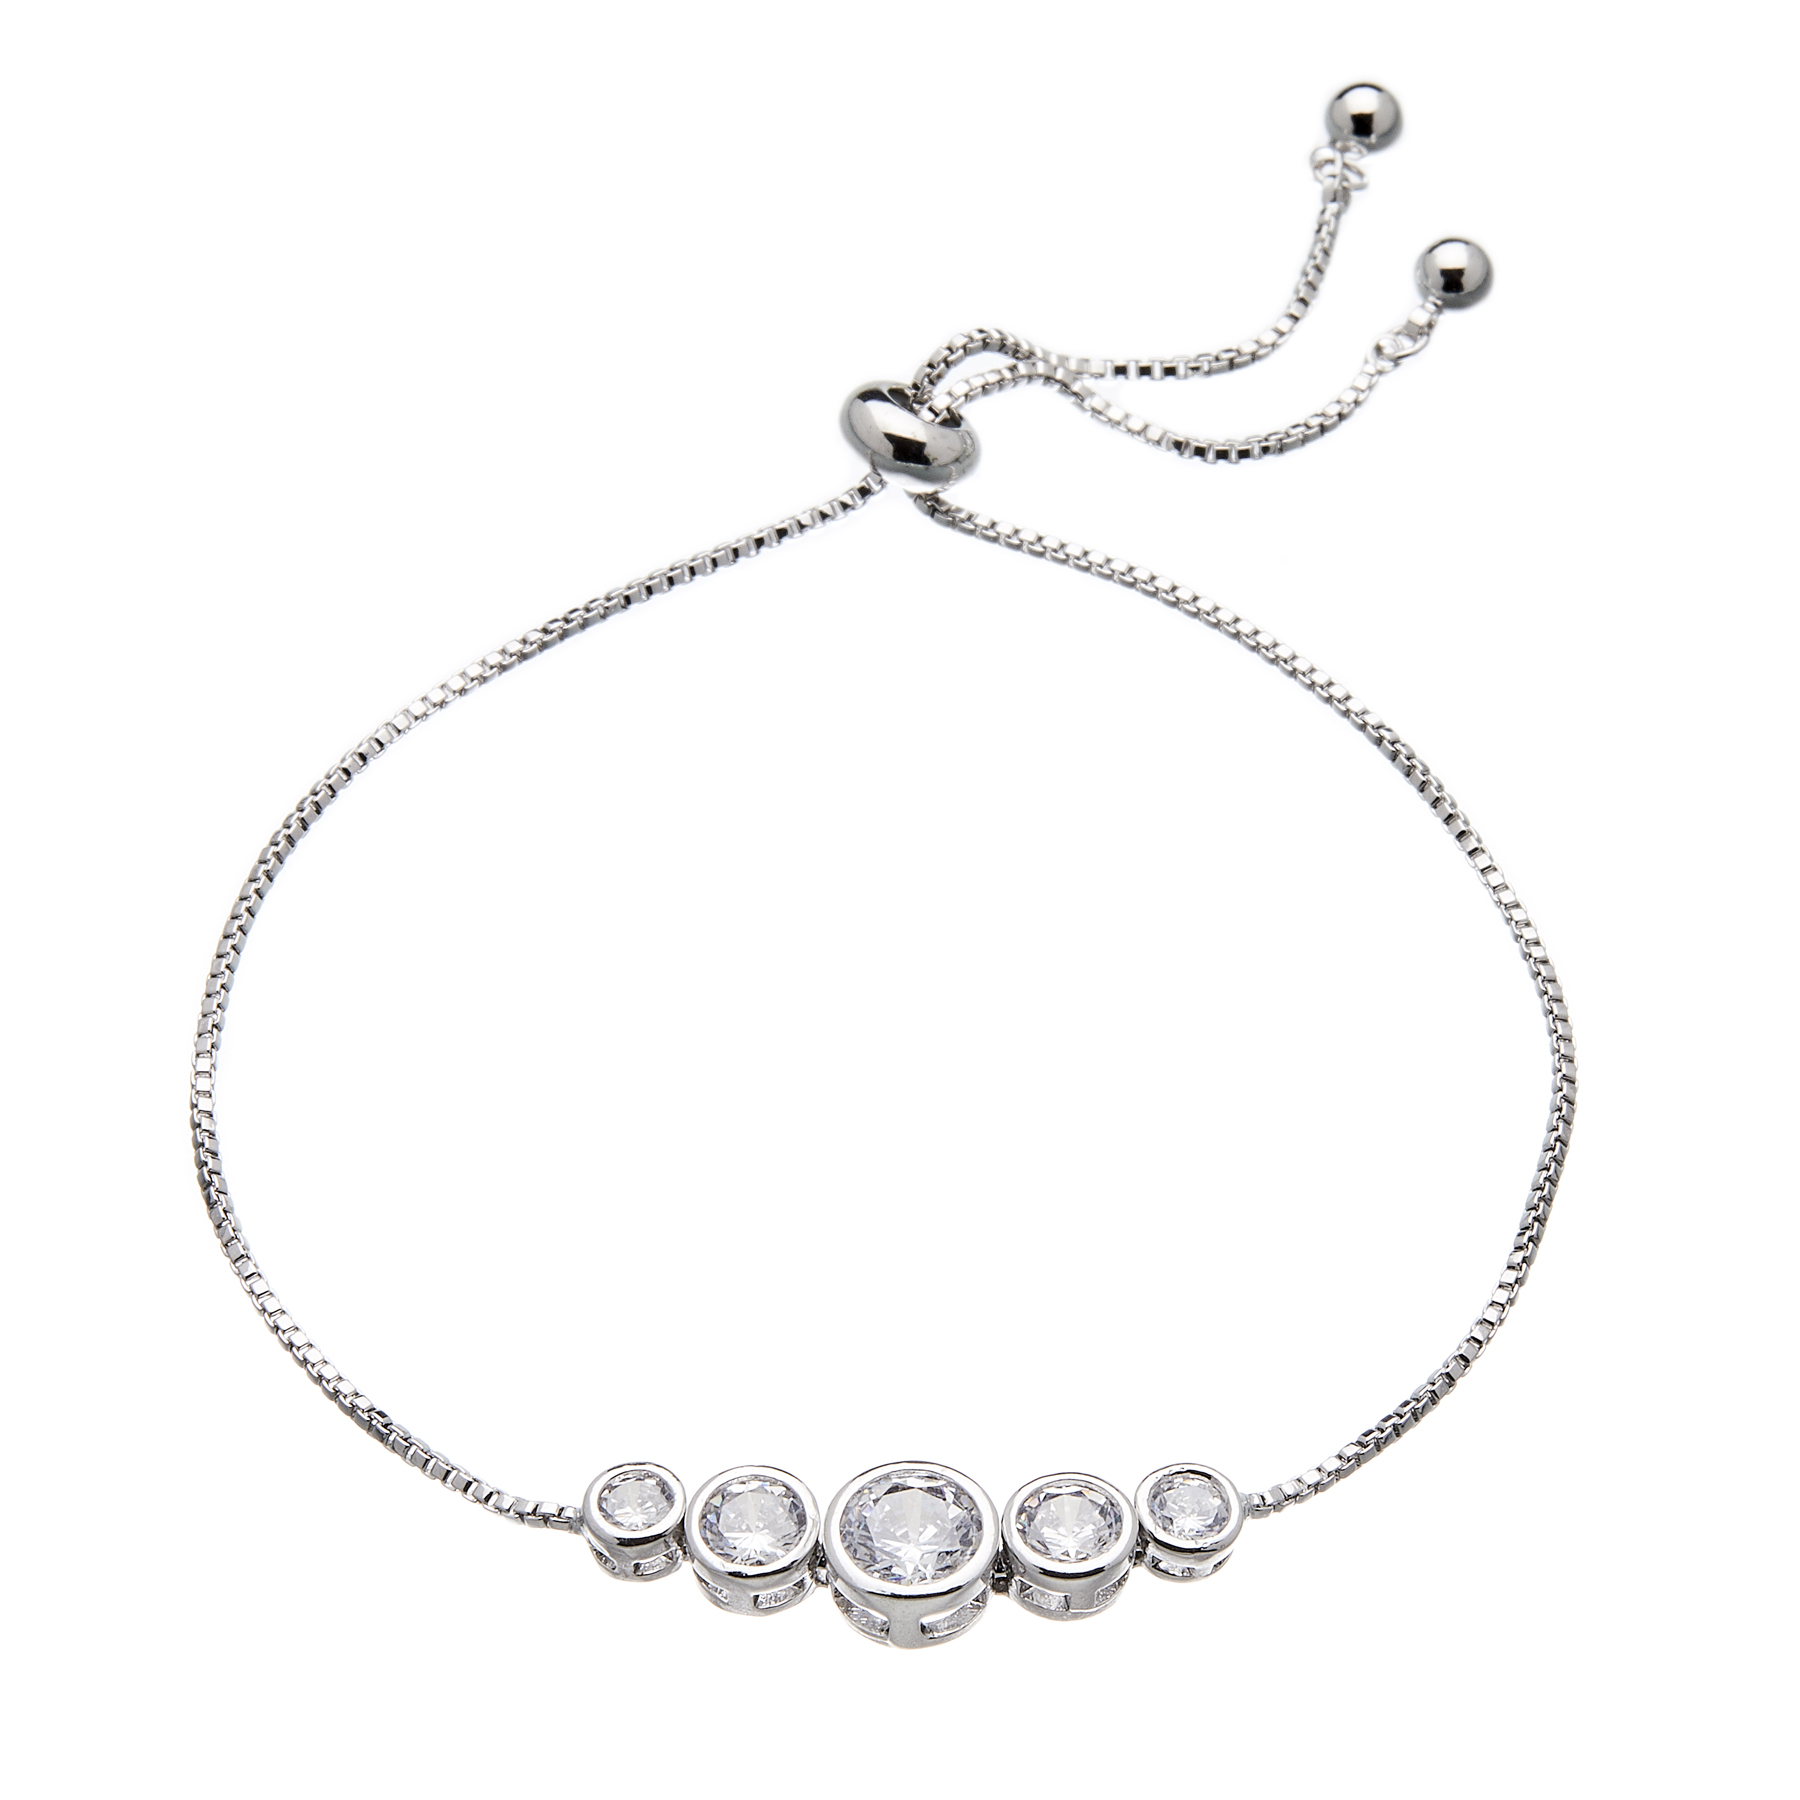 Silver adjustable Bracelet with five round CZ crystals - Netty